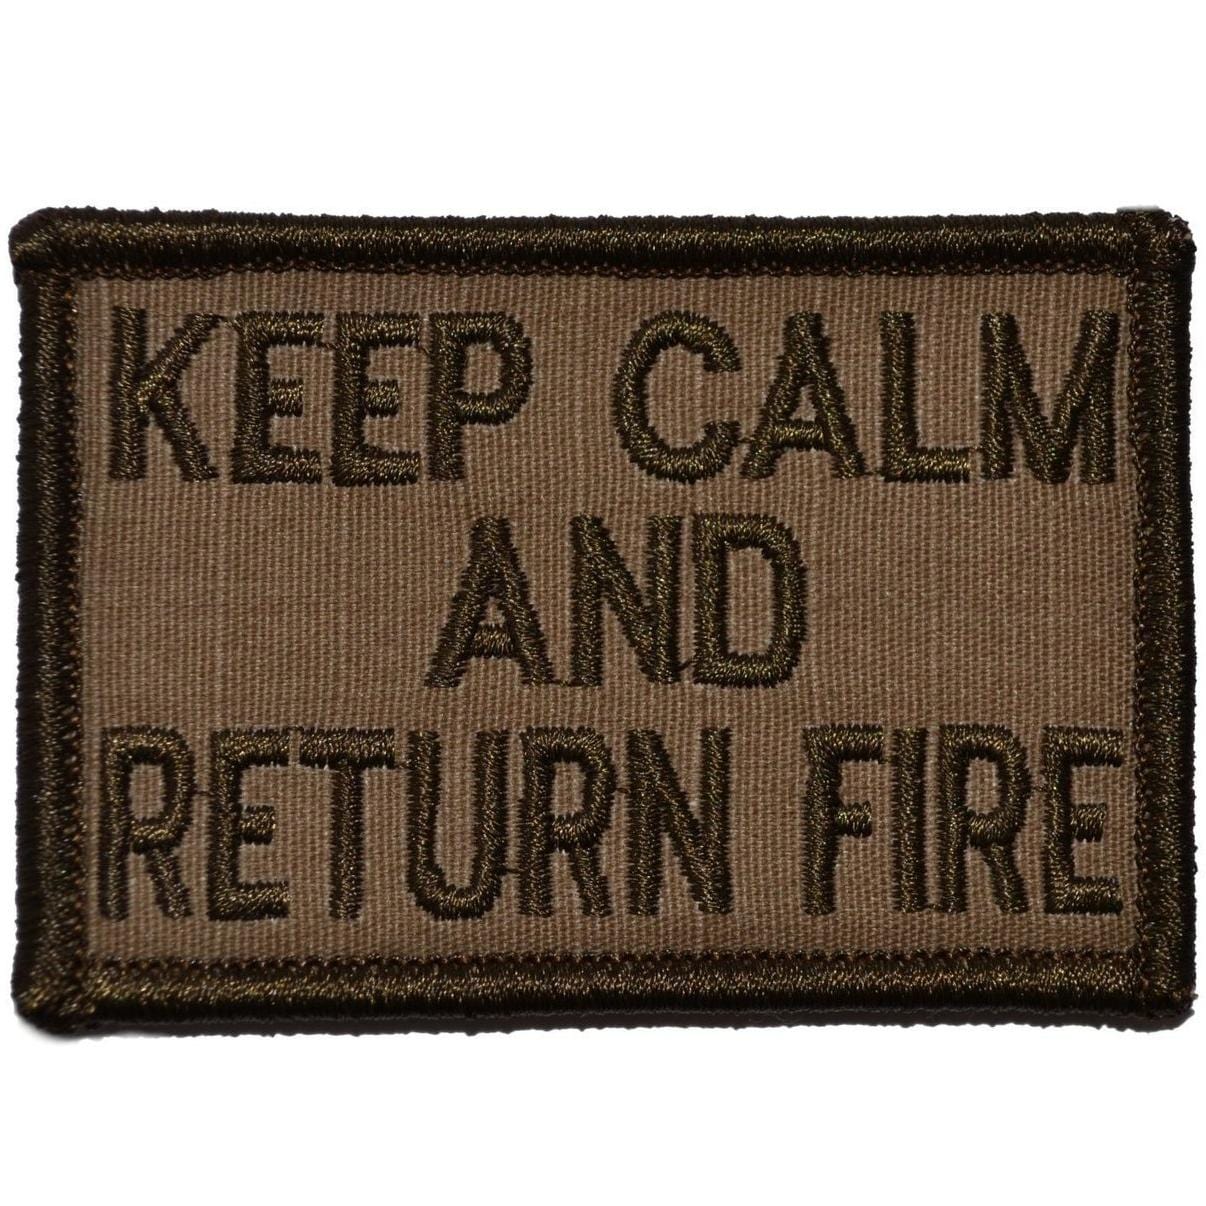 Tactical Gear Junkie Patches Coyote Brown Keep Calm and Return Fire - 2x3 Patch